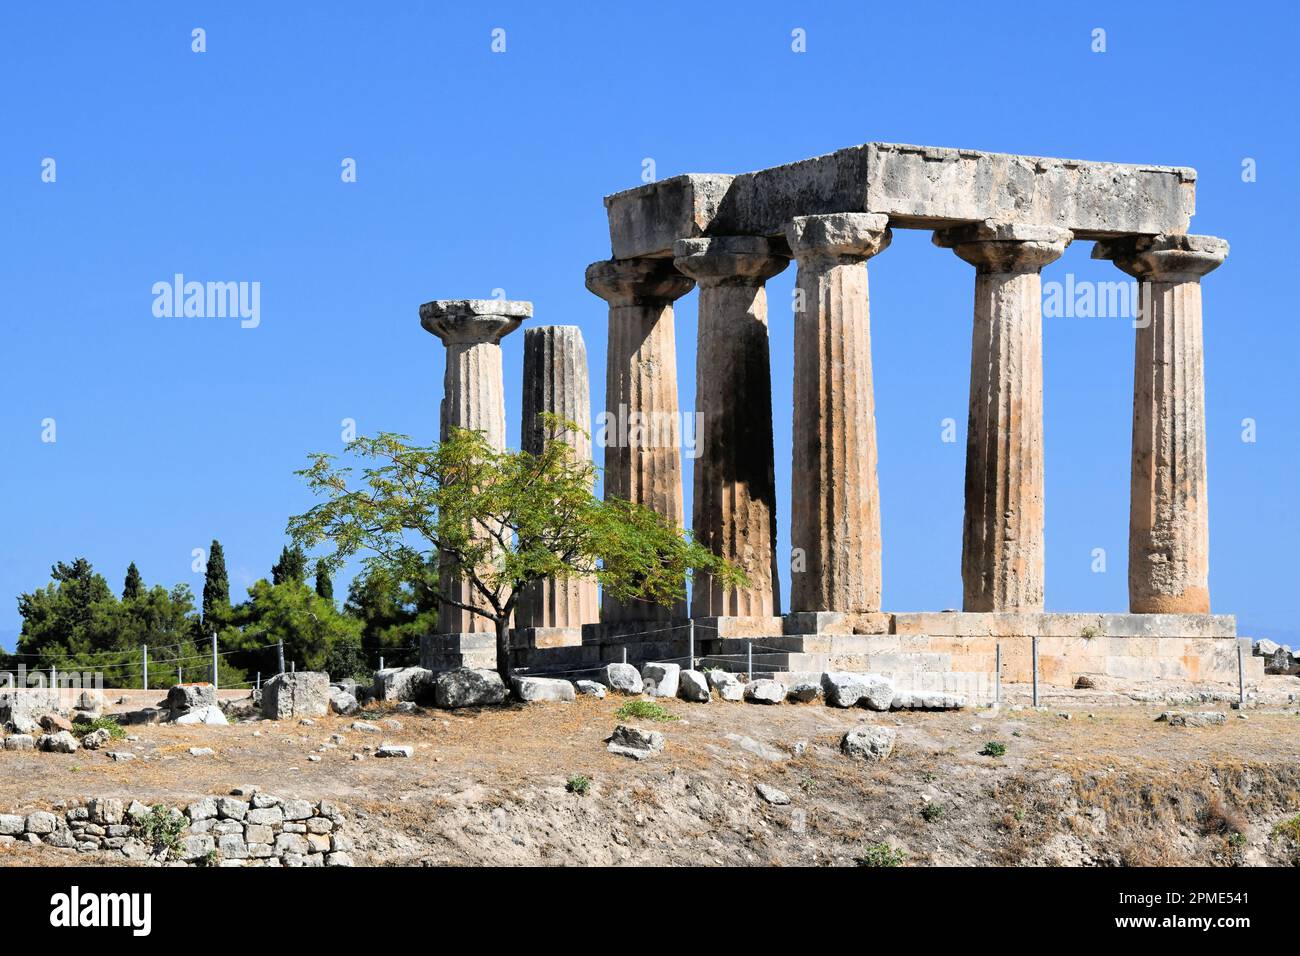 The ancient Temple of Apollo at the Corinth Archeological Site and museum in Corinth Greece' on a sunny day with blue sky. Stock Photo